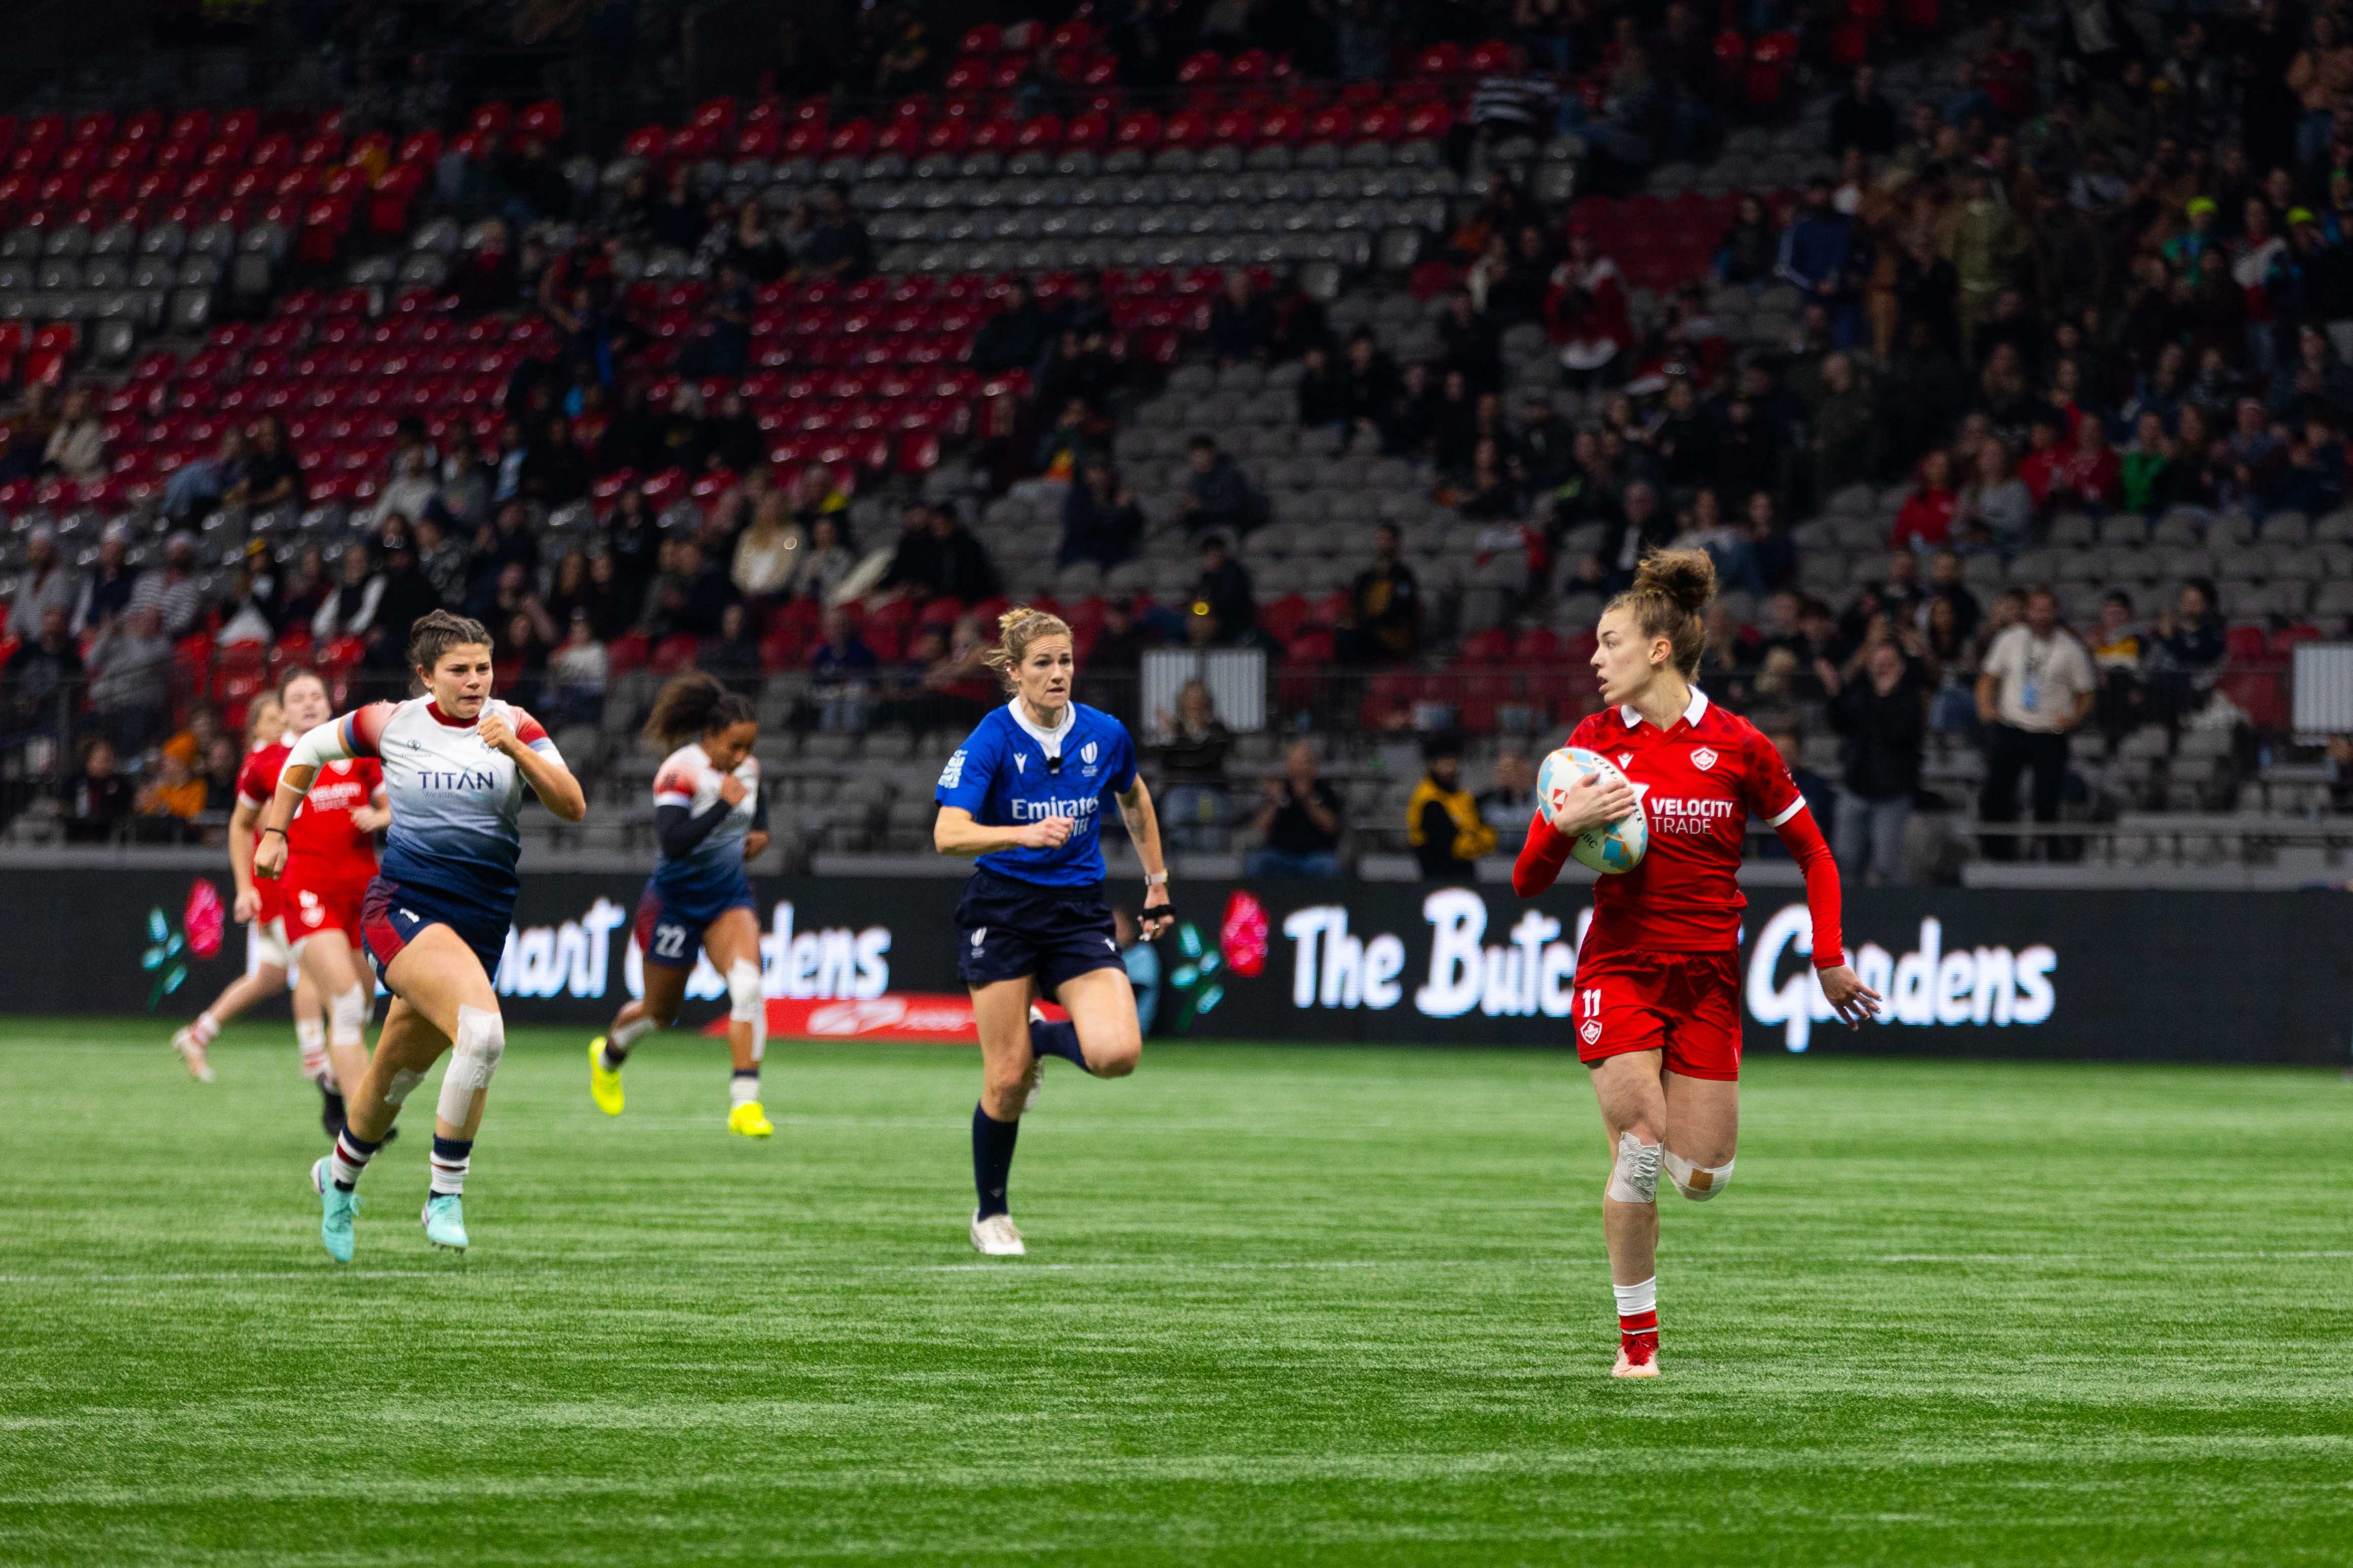 Piper Logan speeding past Great Britain for a try in round-robin play.